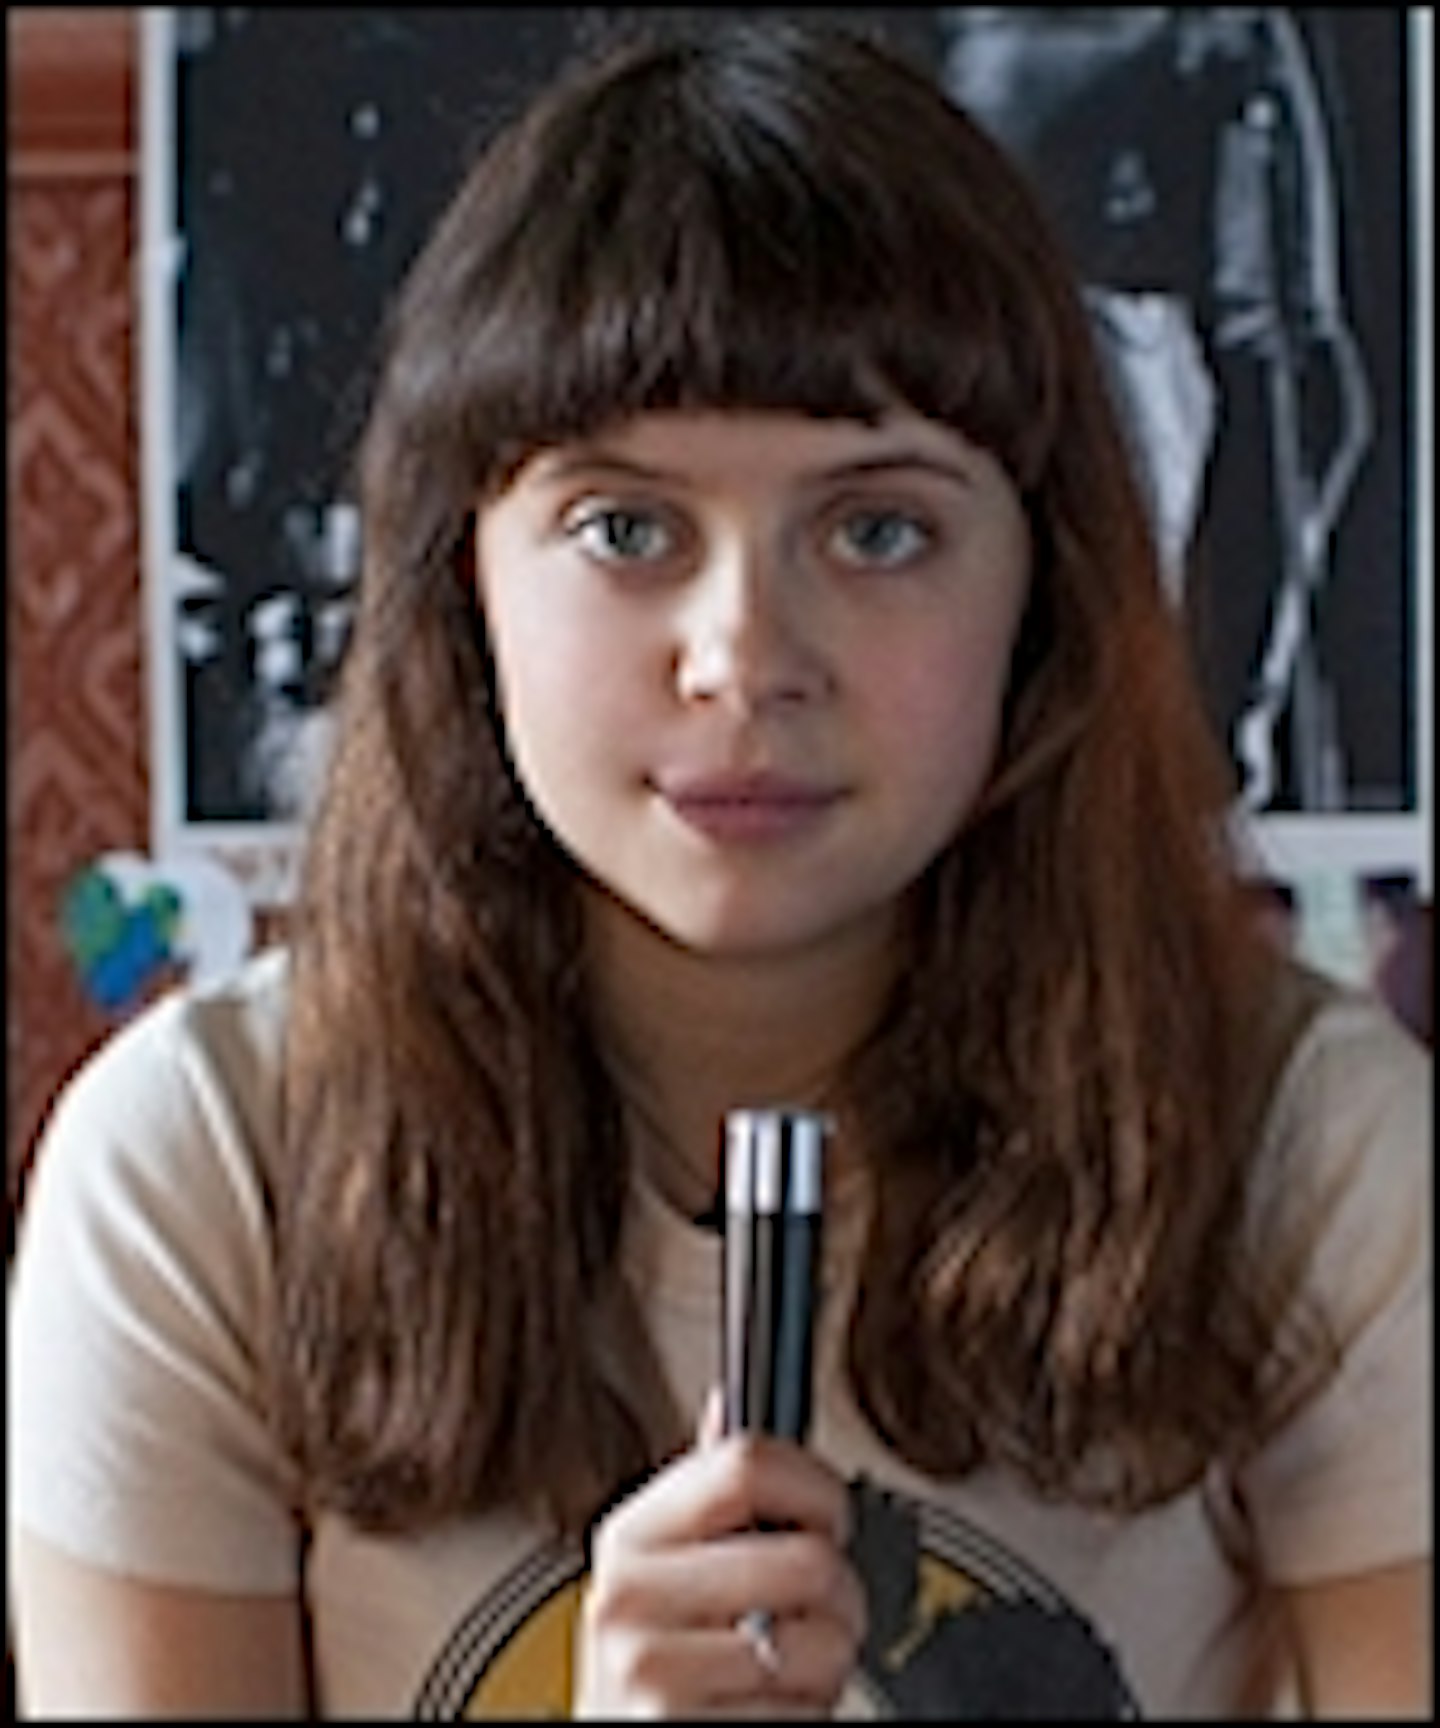 First Trailer For The Diary Of A Teenage Girl